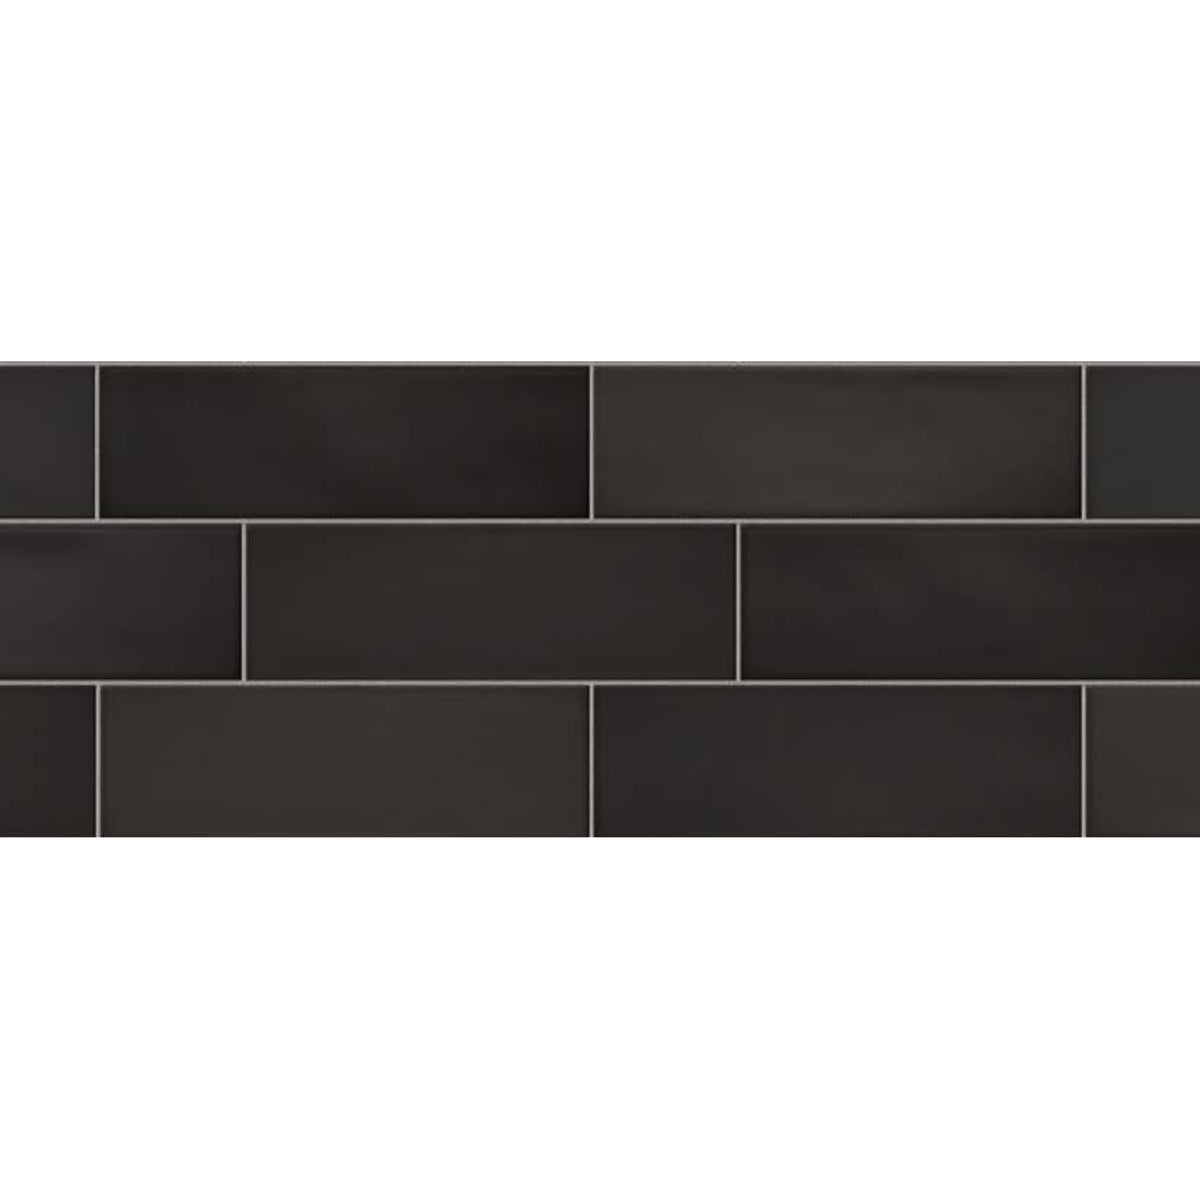 Topcu - Chalky - 2.5 in. x 8 in. Ceramic Wall Tile - Graphite Installed